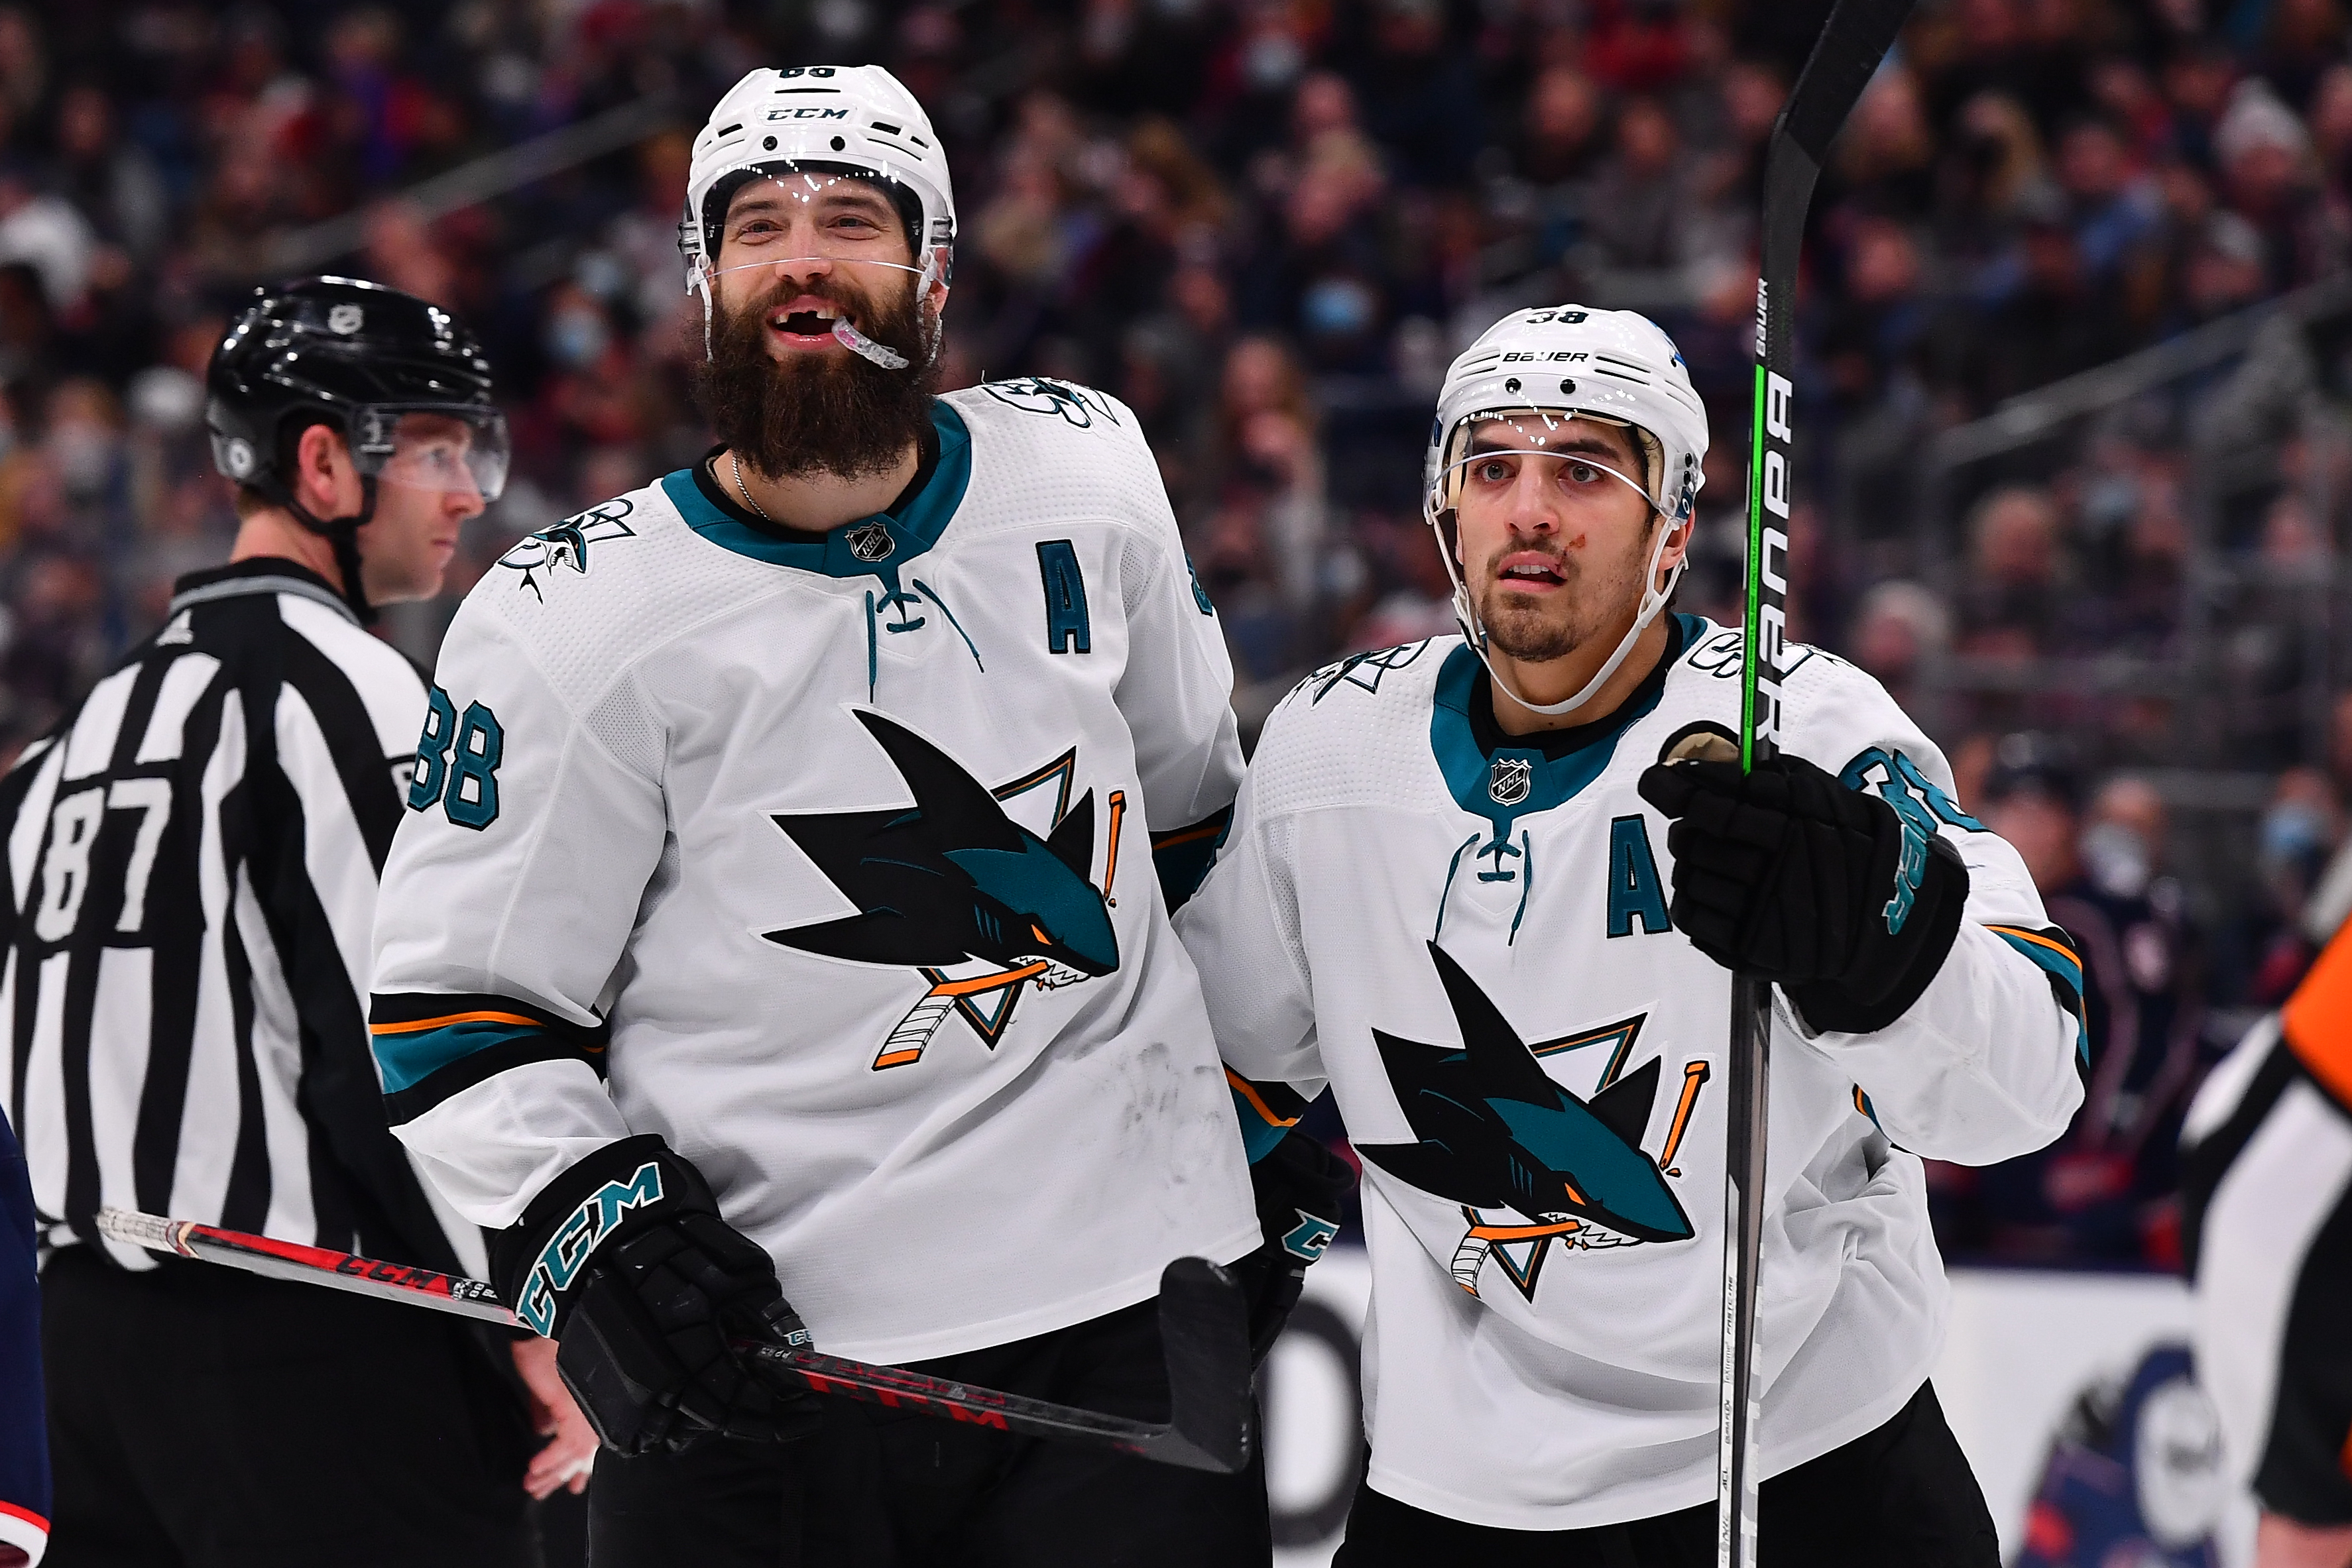 Brent Burns #88 of the San Jose Sharks celebrates his second period goal with teammate Mario Ferraro #38 of the San Jose Sharks during a game against the Columbus Blue Jackets at Nationwide Arena on December 5, 2021 in Columbus, Ohio.